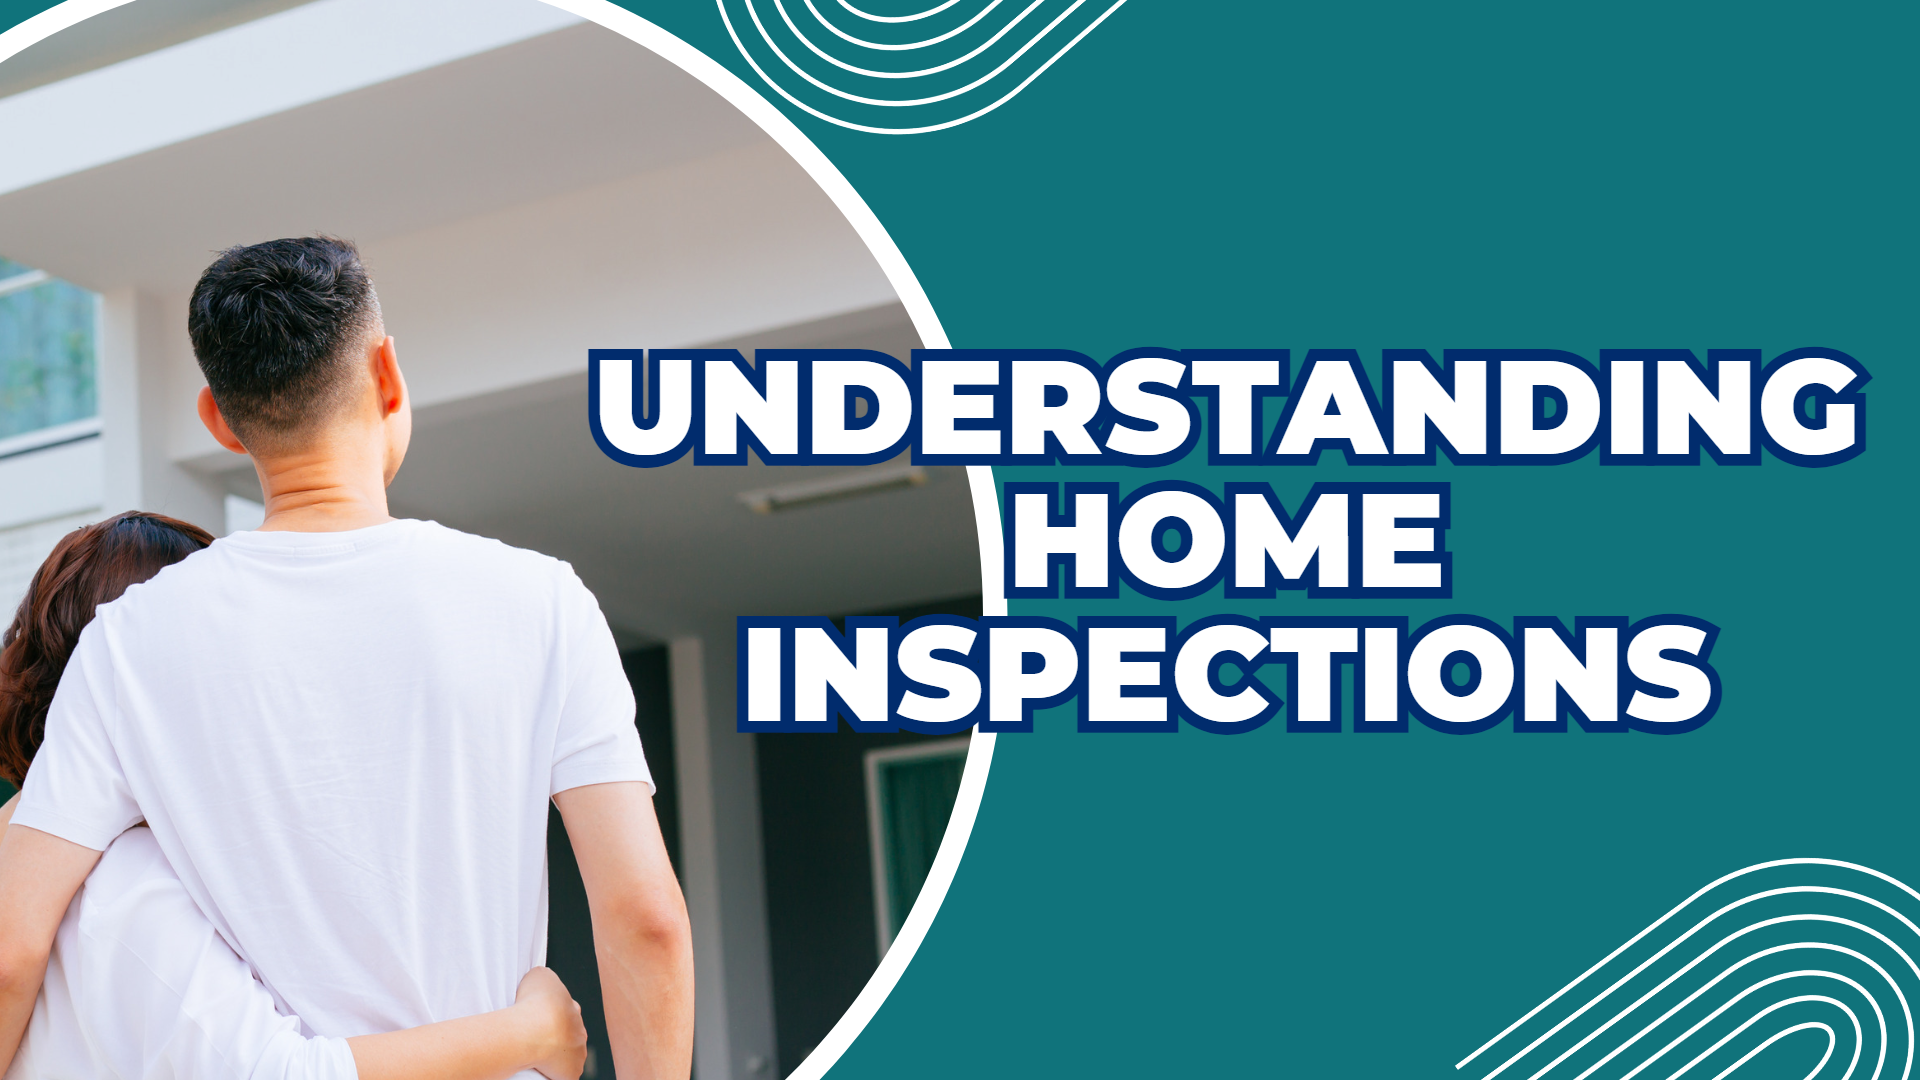 Understanding Home Inspections: What to Expect When Buying Your First Home